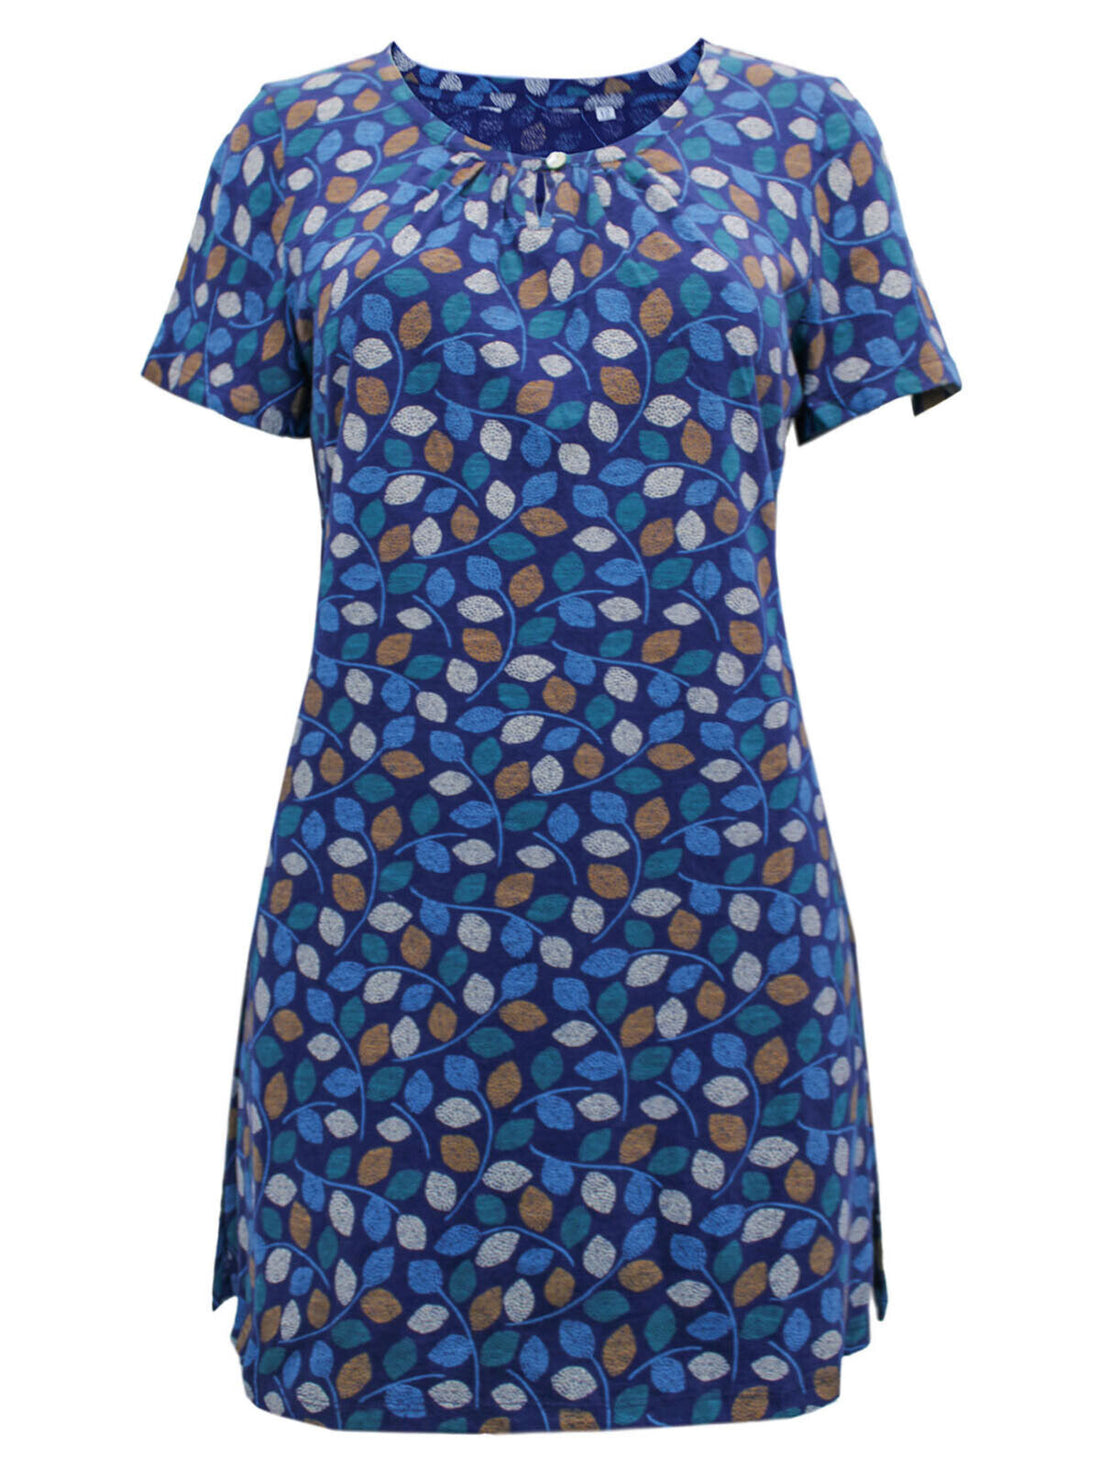 EX Seasalt Blue Spotty Leaves Yacht Countryside Tunic 8 12 14 16 18 20 26/28